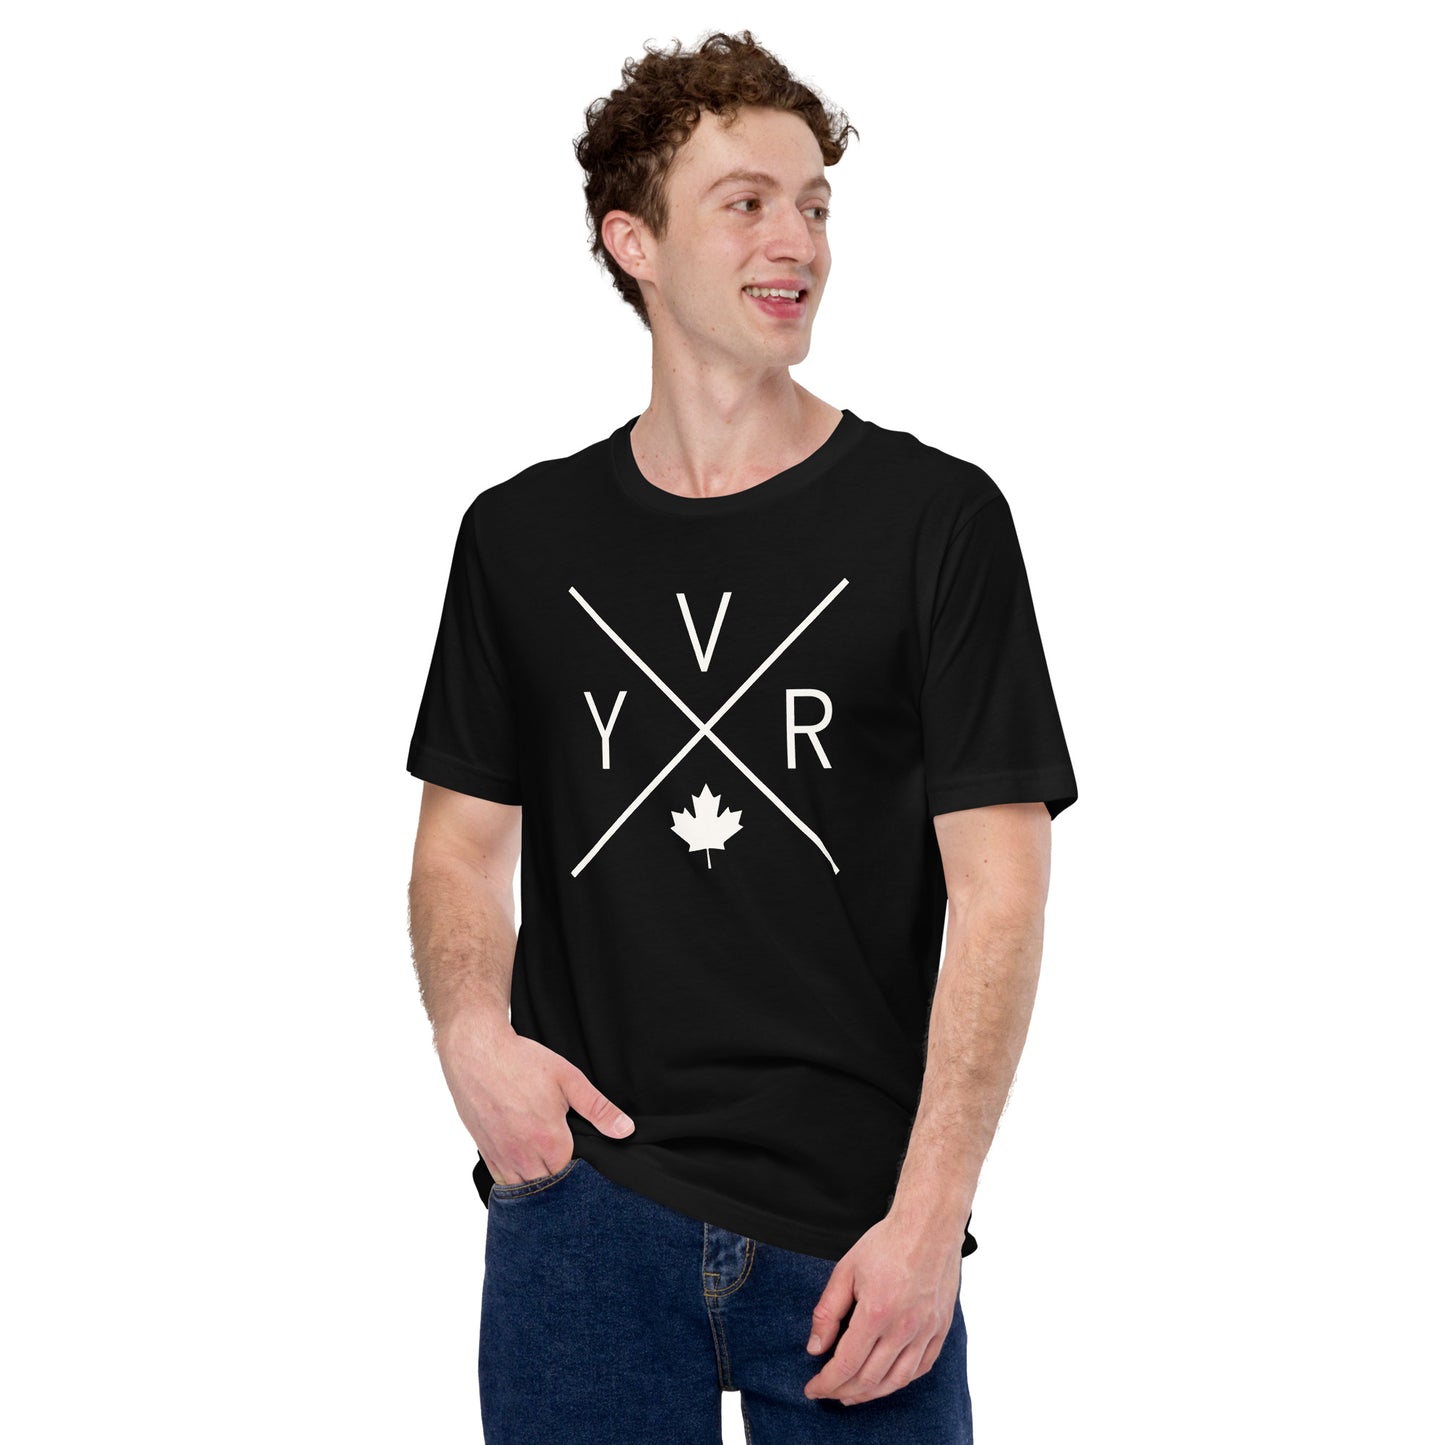 Crossed-X T-Shirt - White Graphic • YVR Vancouver • YHM Designs - Image 06